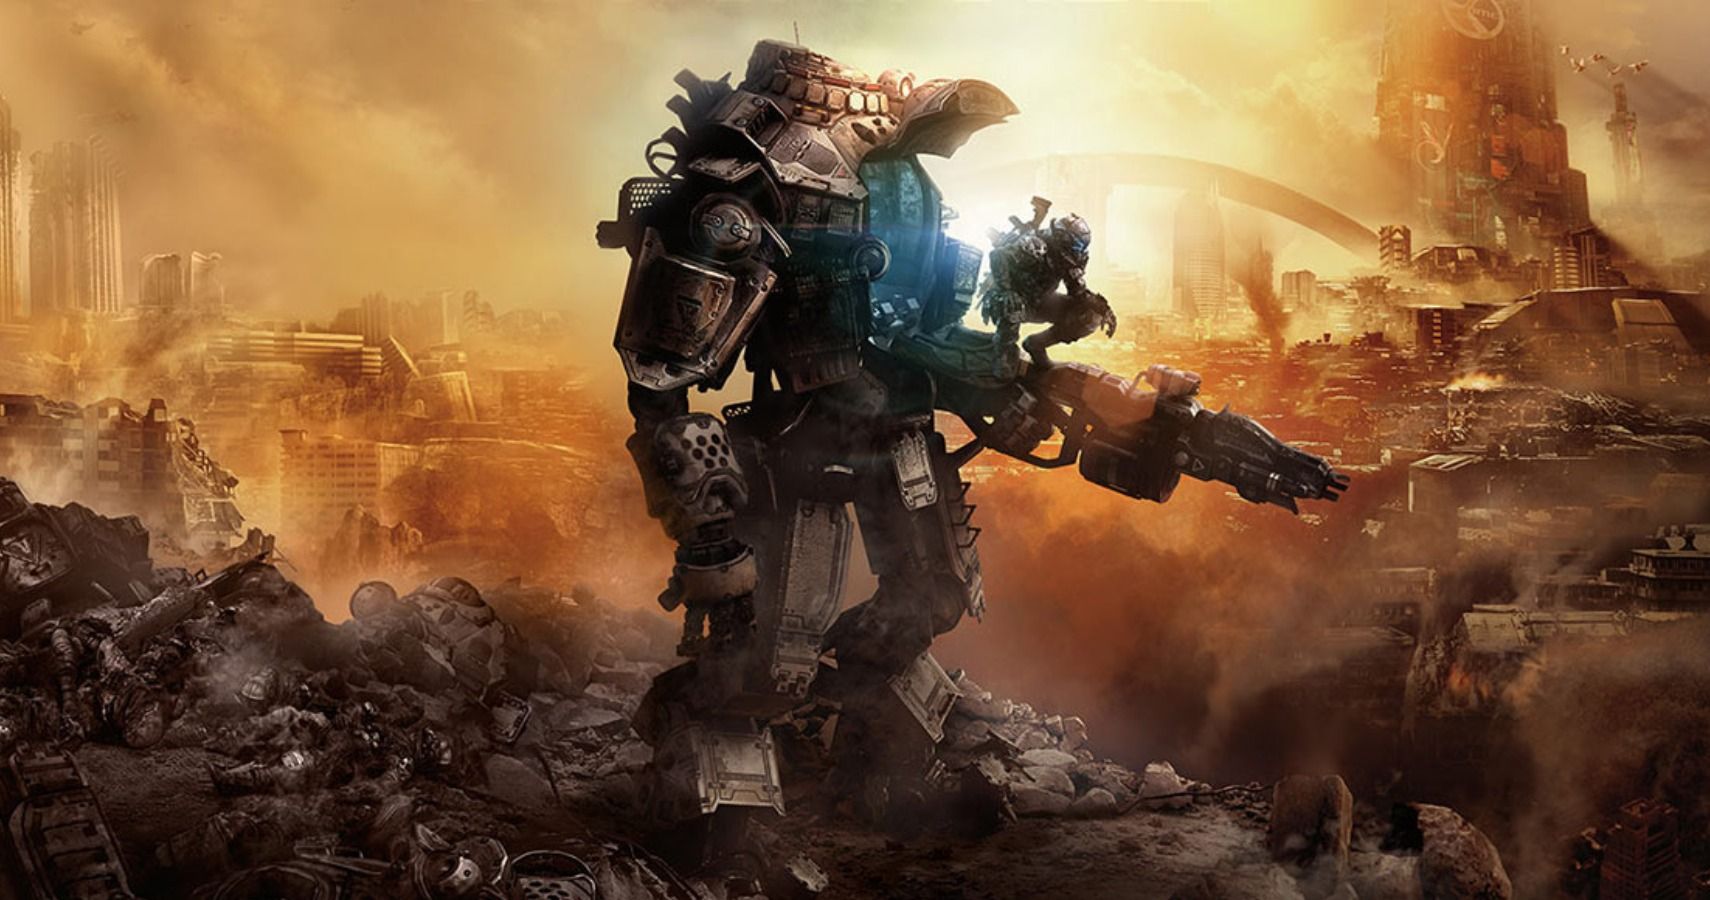 Titanfall servers have been ruined by racist hackers for years